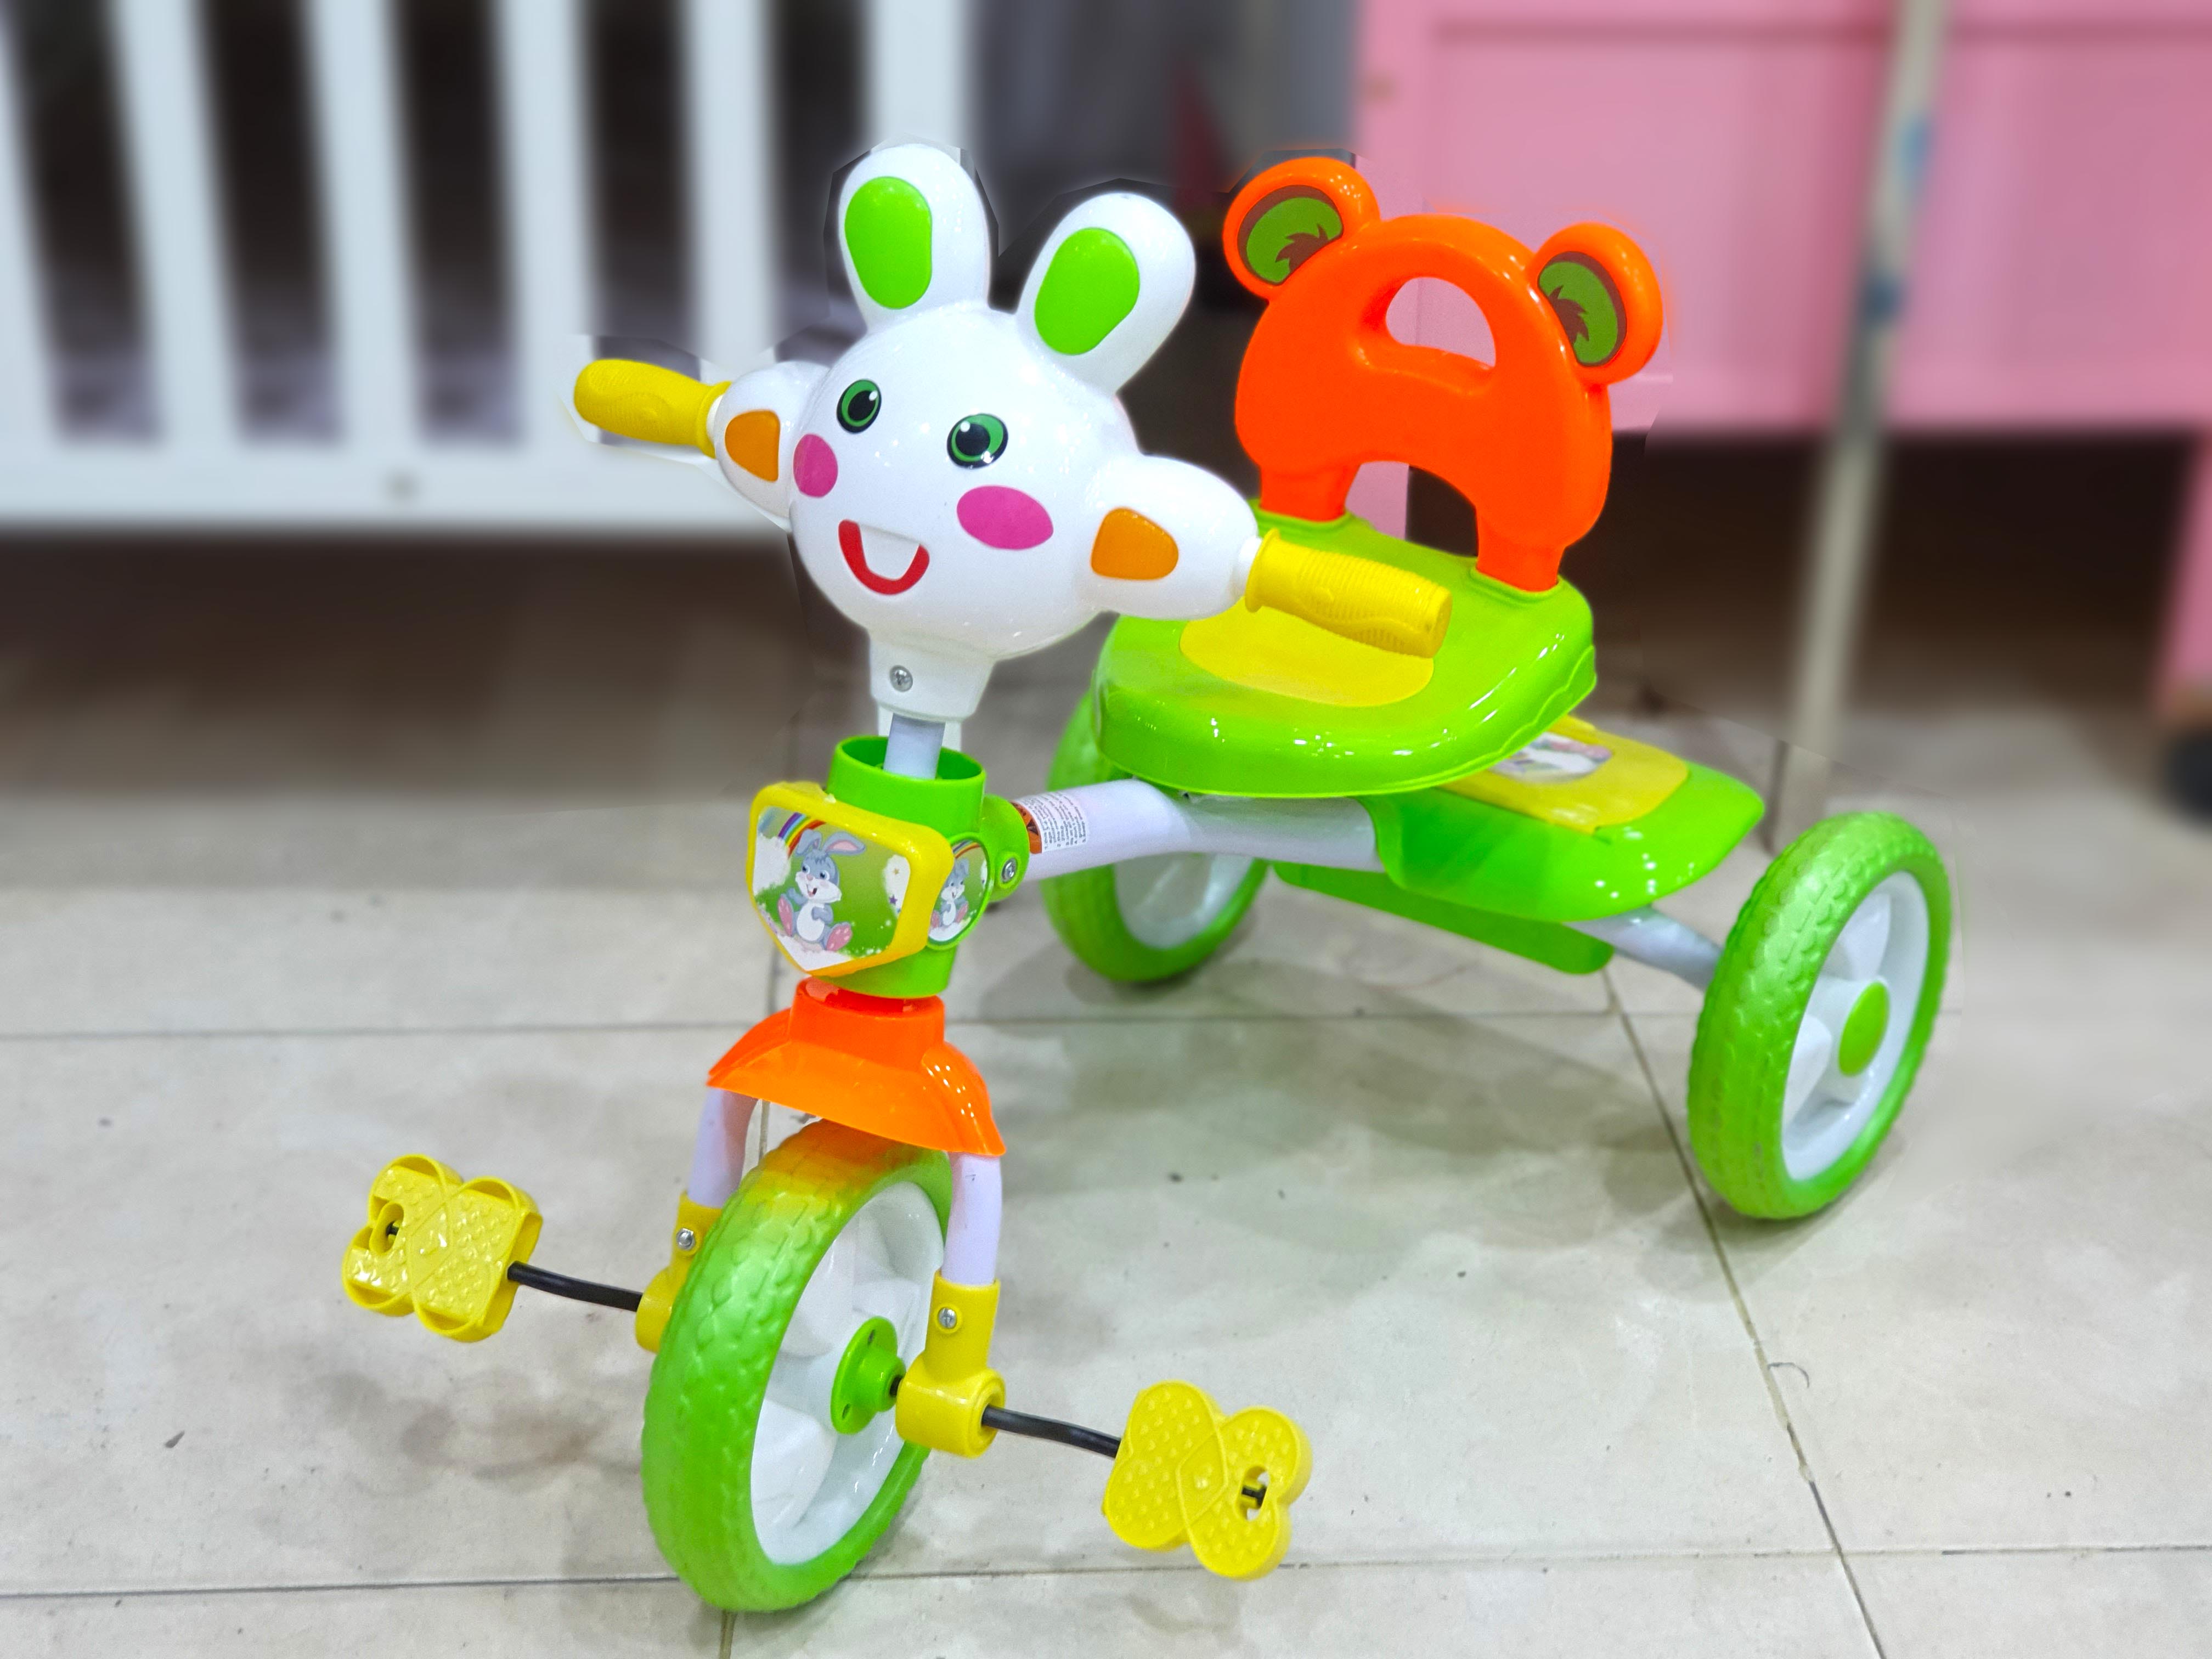 baby bicycle for 1 year old